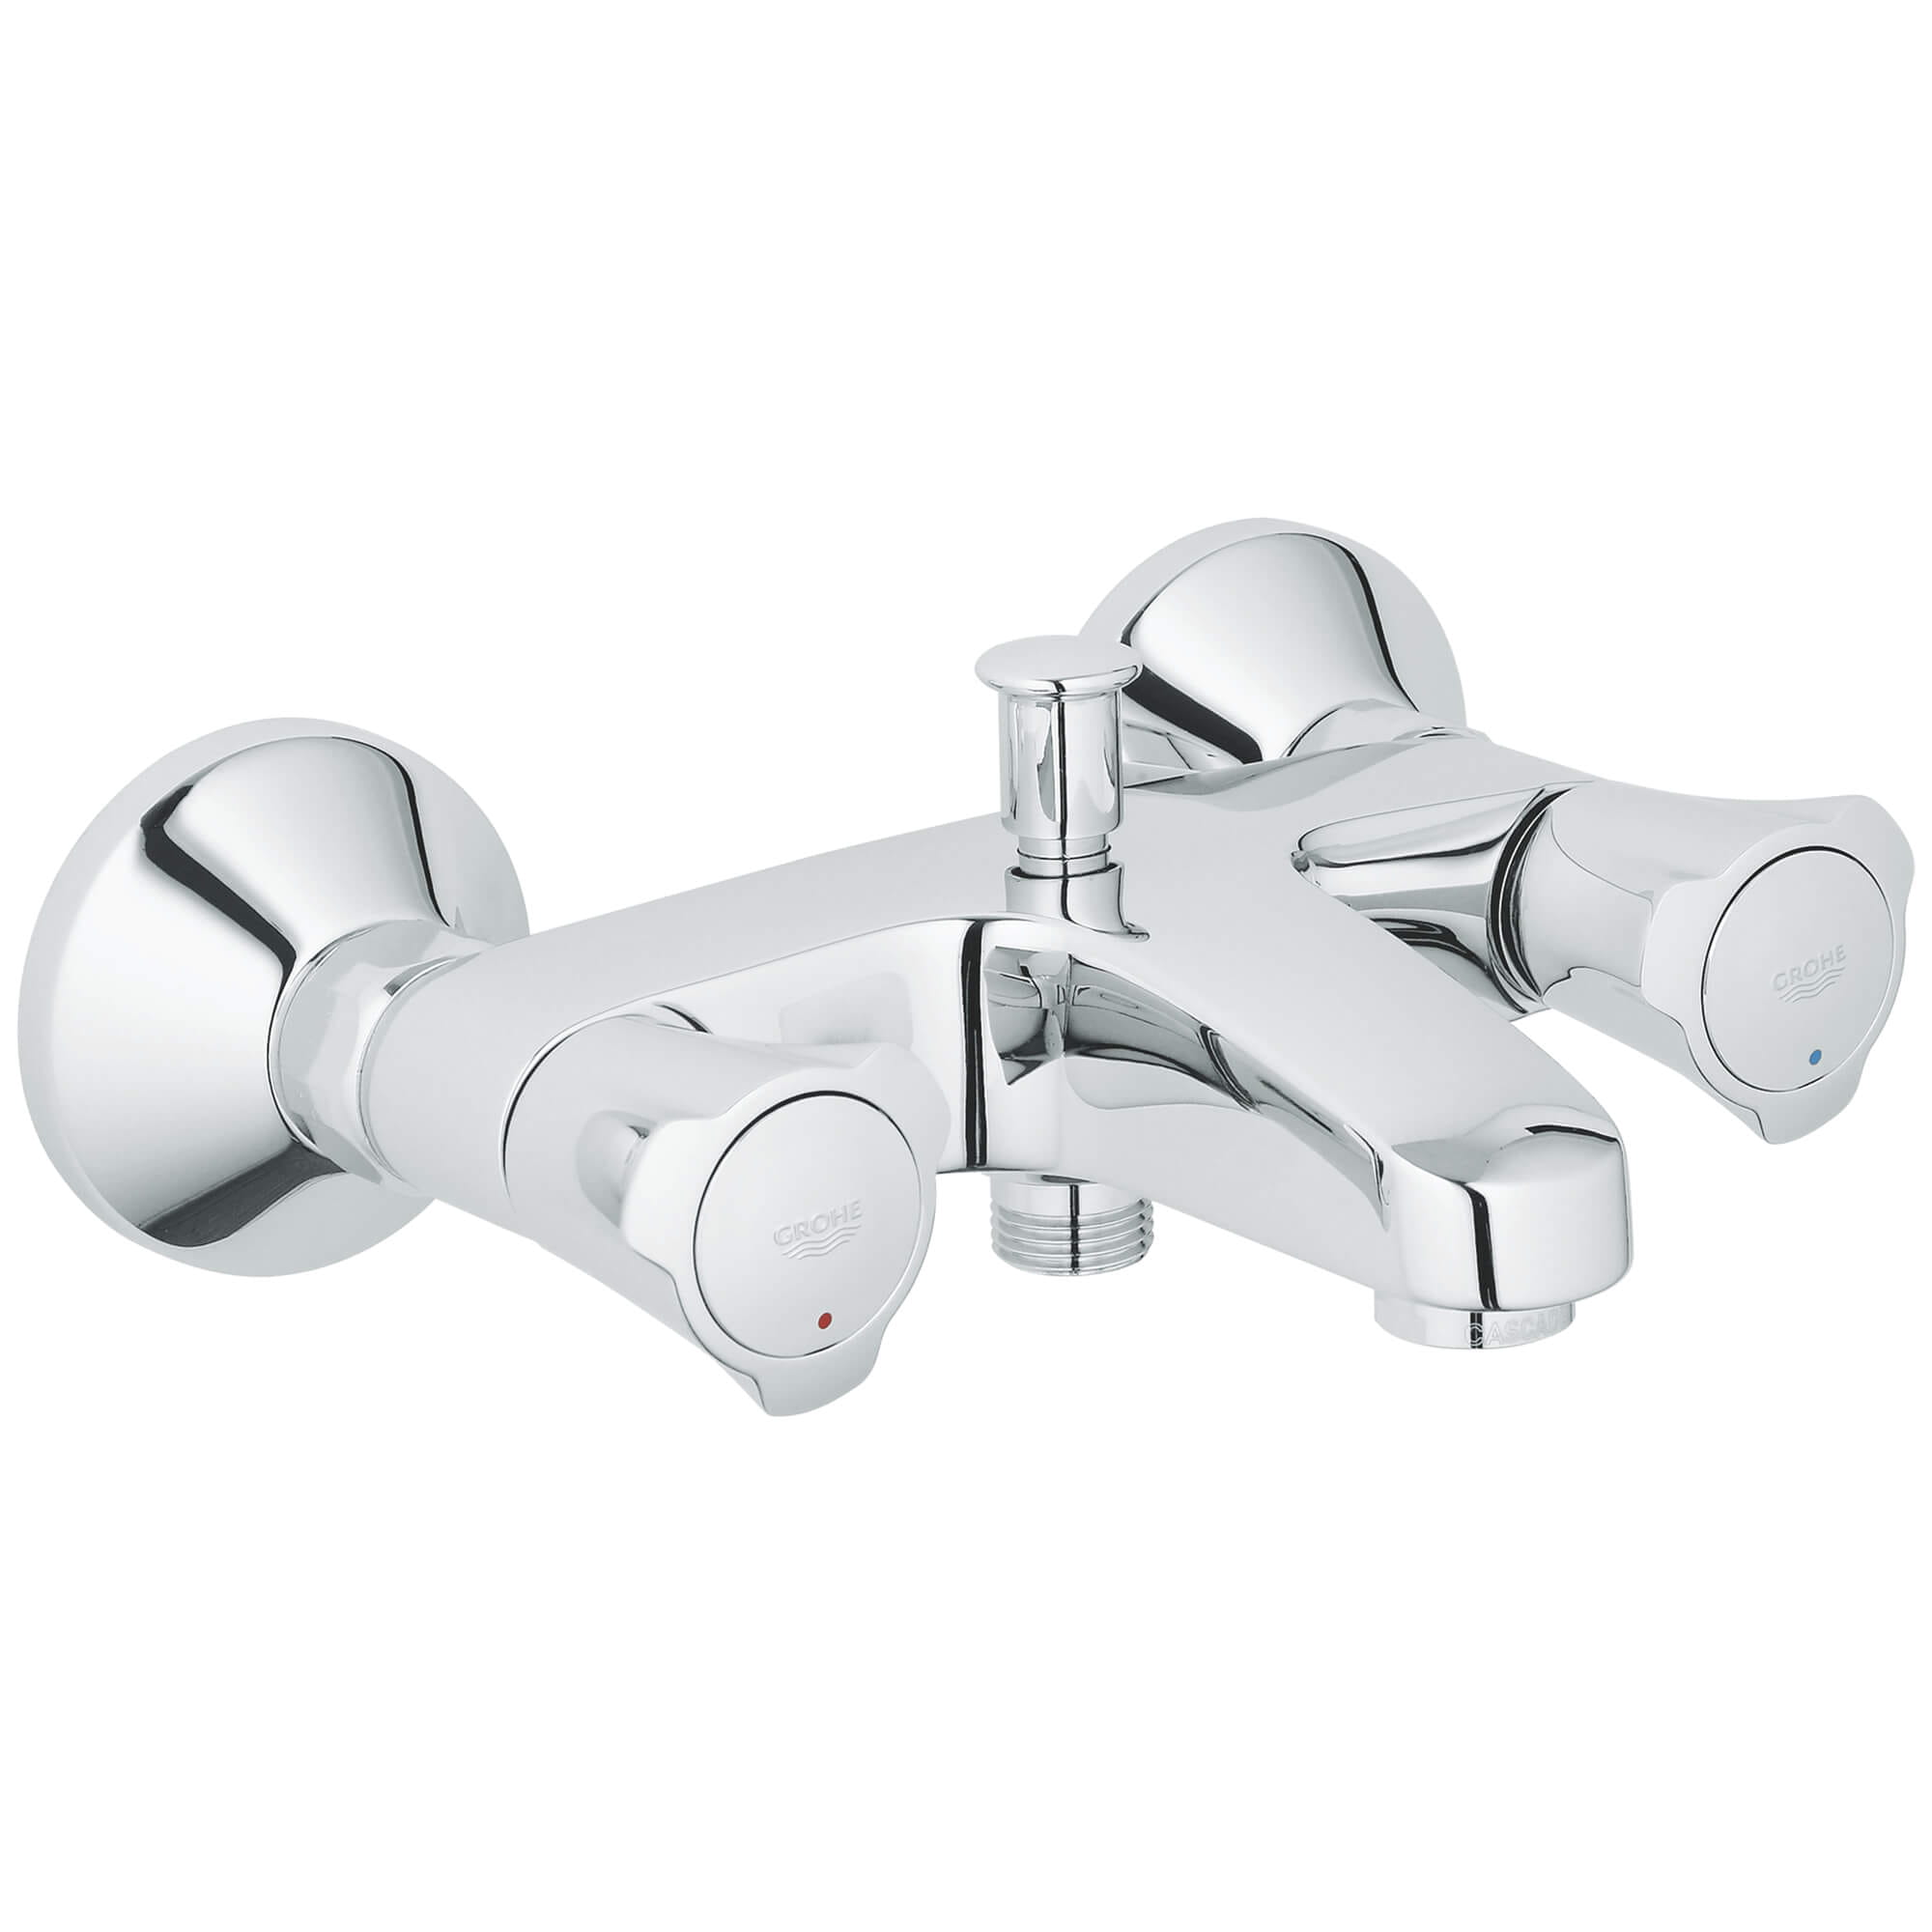 COSTA  TUB SPOUT Model: 25450001-related